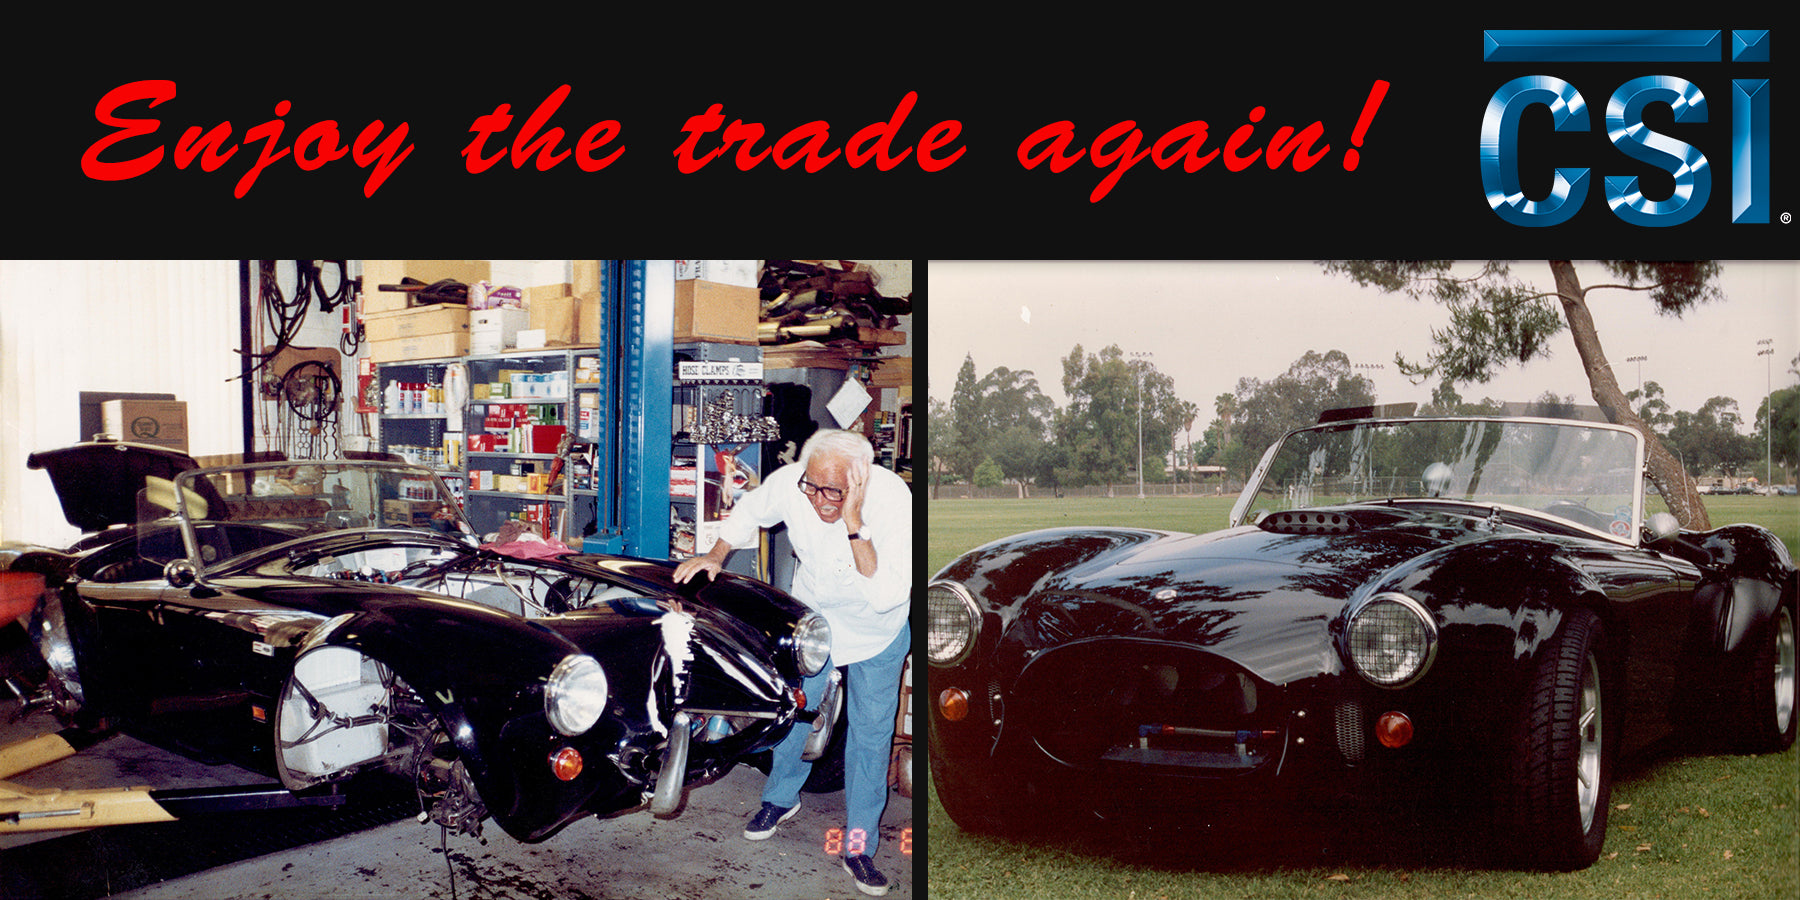 Enjoy the trade again! CSI Clearcoat Solutions